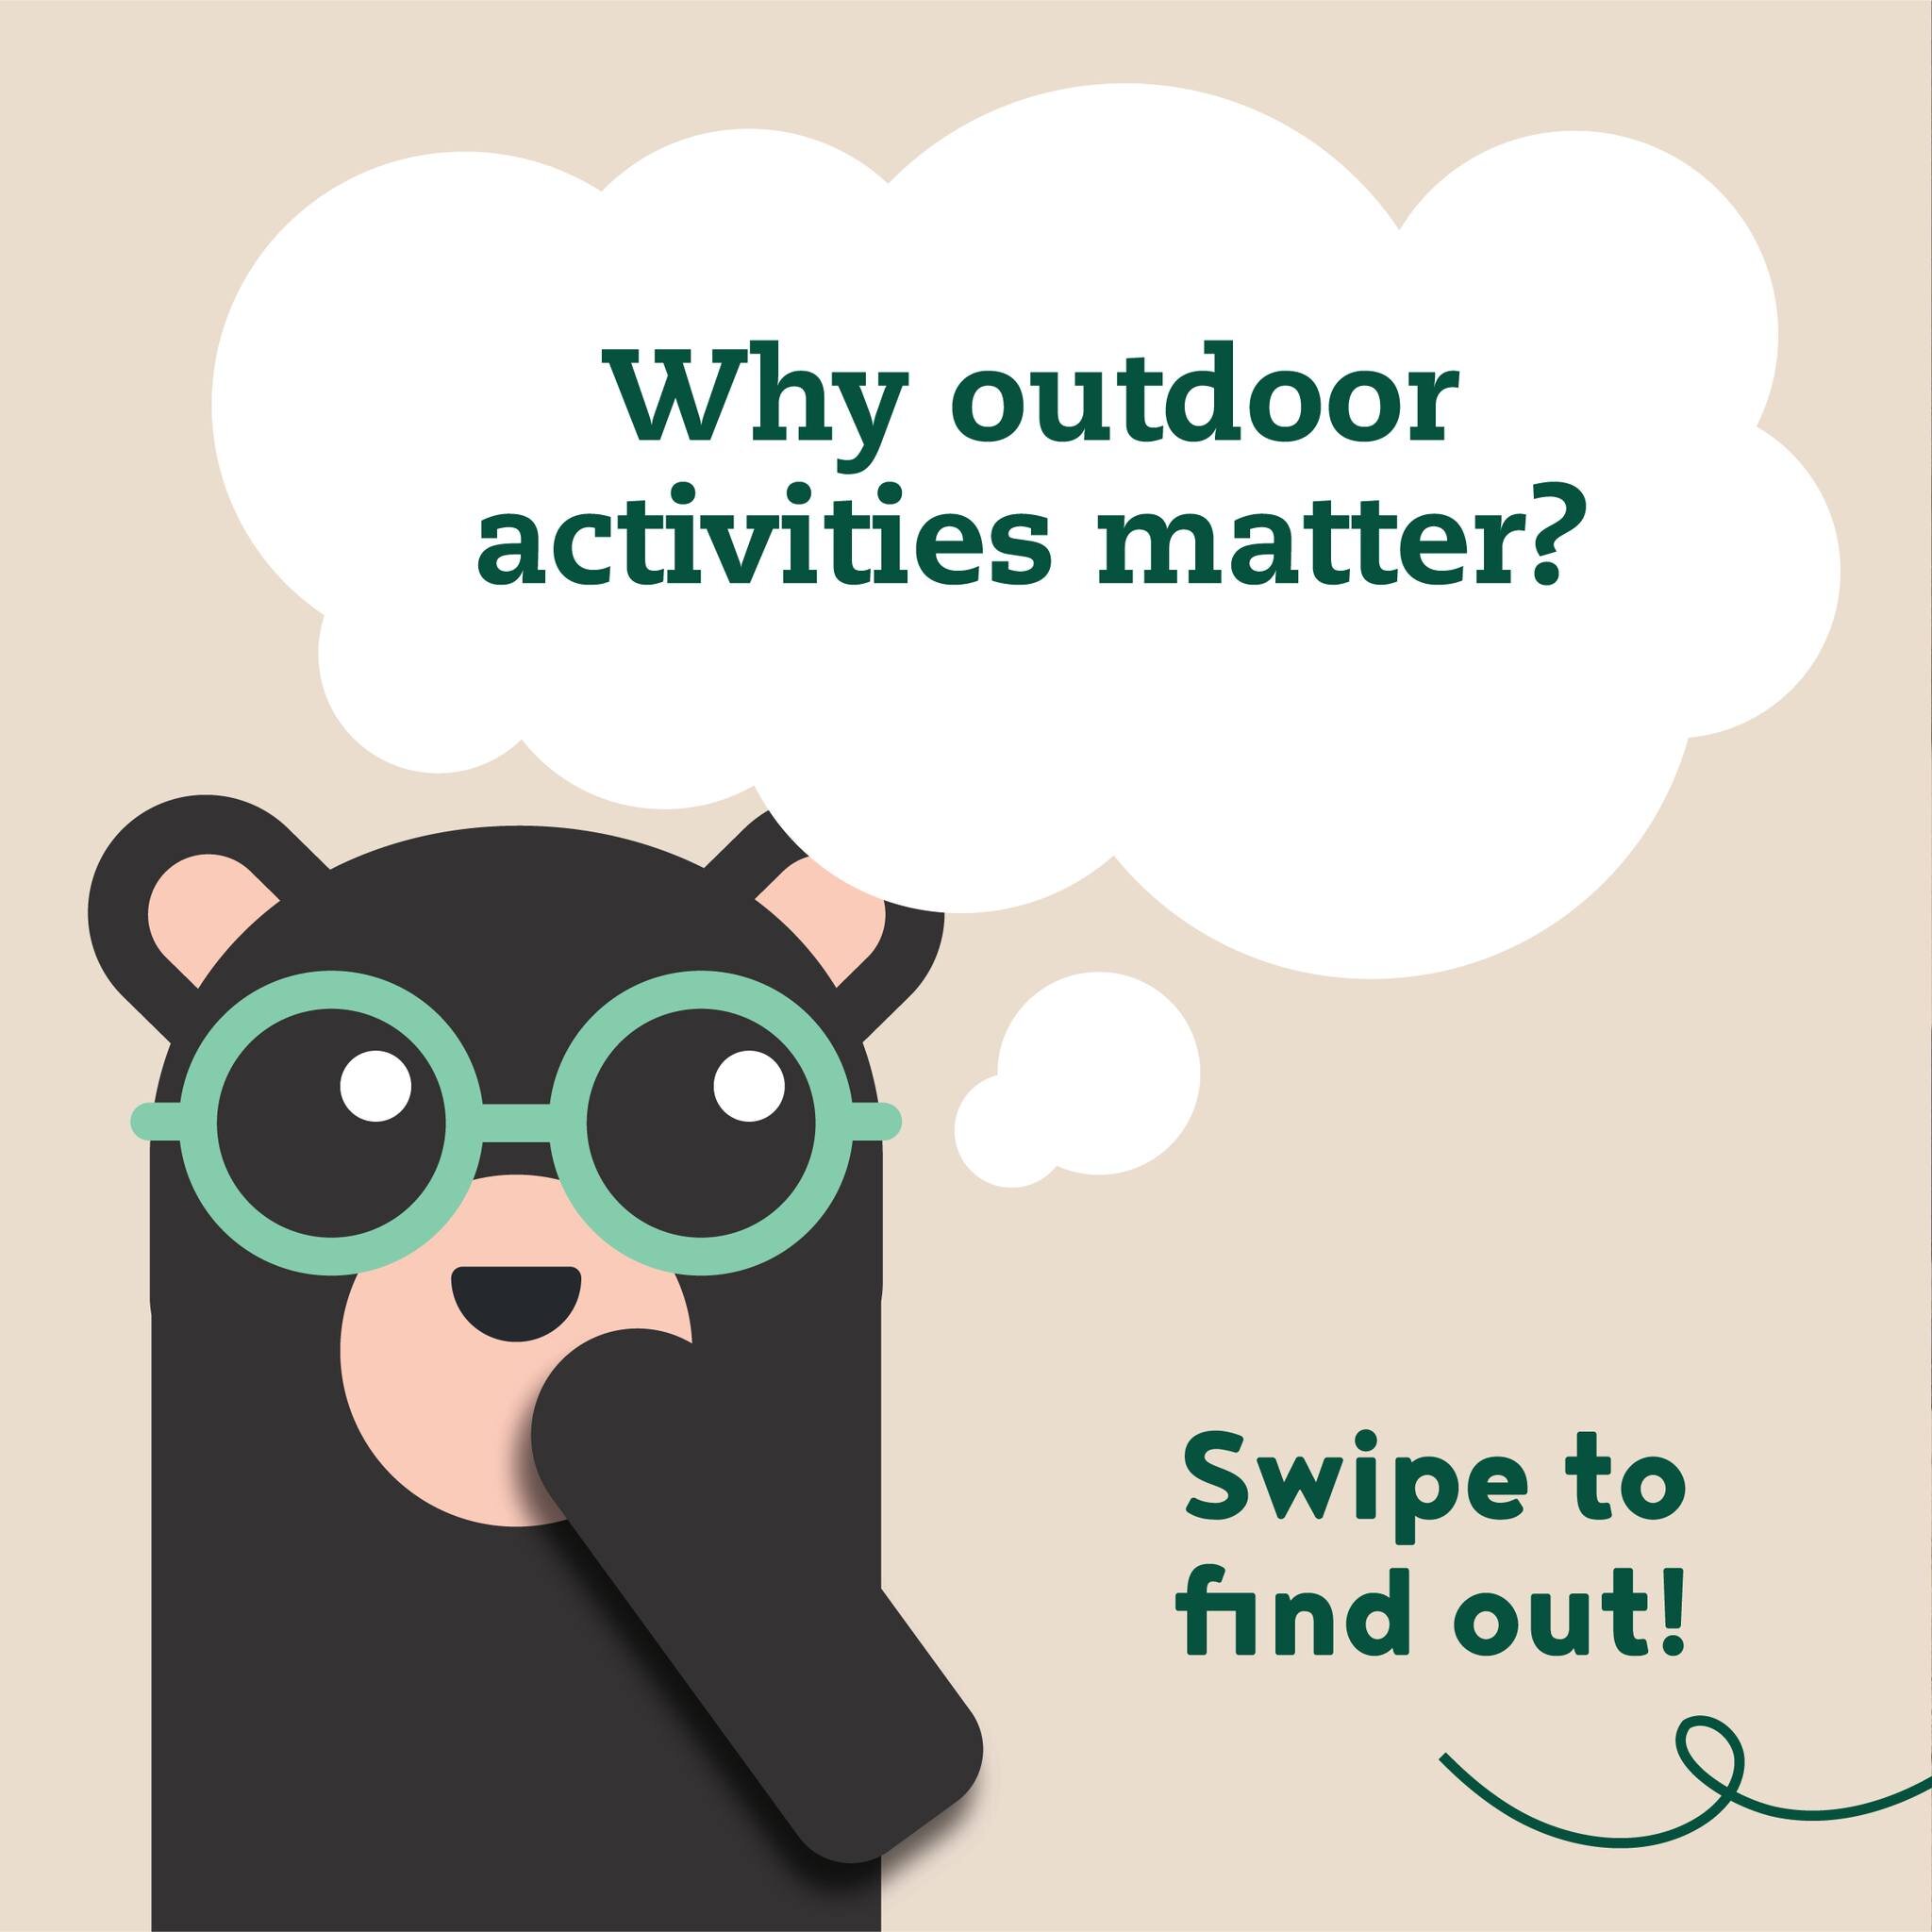 𝐖𝐡𝐲 𝐨𝐮𝐭𝐝𝐨𝐨𝐫 𝐚𝐜𝐭𝐢𝐯𝐢𝐭𝐢𝐞𝐬 𝐦𝐚𝐭𝐭𝐞𝐫❓

🌳🪵Outdoor is the best place to learn. When going to the playground, park or to the forest the stress levels go down. Fresh air will give a great reboost to the brain and wires the brain for 